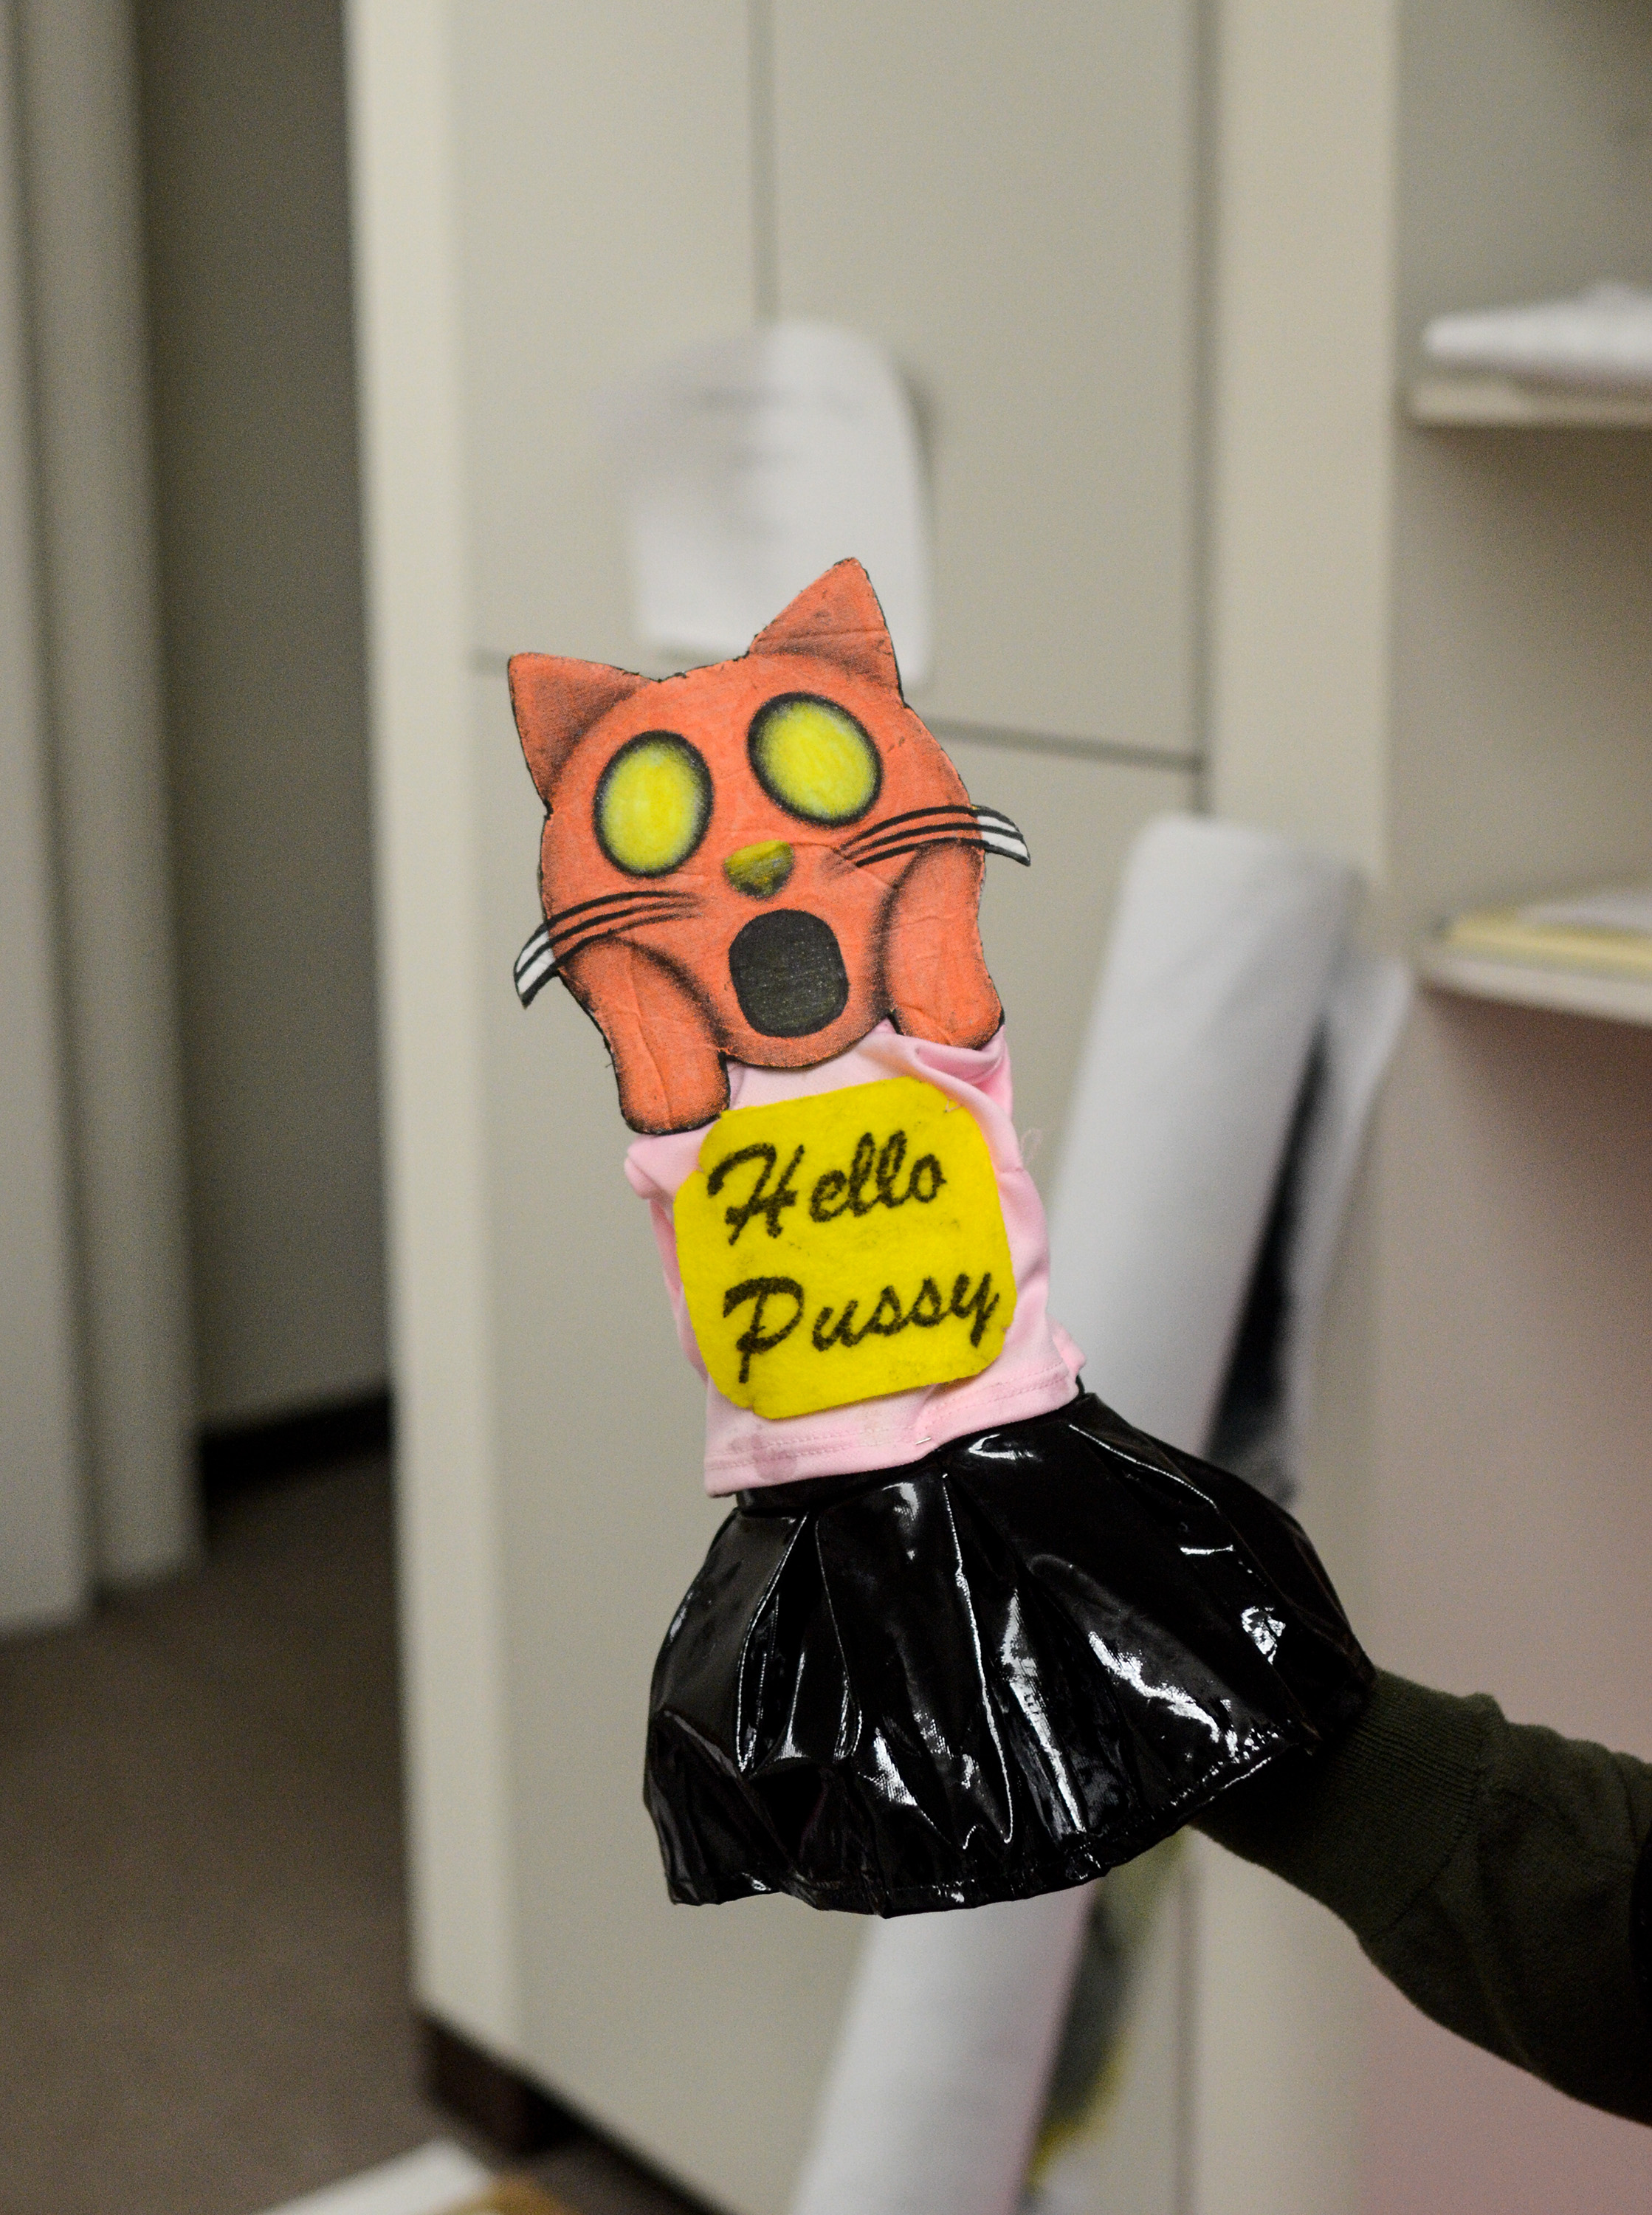 Image: A hand puppet has the head of an orange emoji cat making a shocked face that alludes to "The Scream" by Edvard Munch. It wears a pink and black outfit with a yellow sign that says "Hello Pussy." Image by William Camargo. 